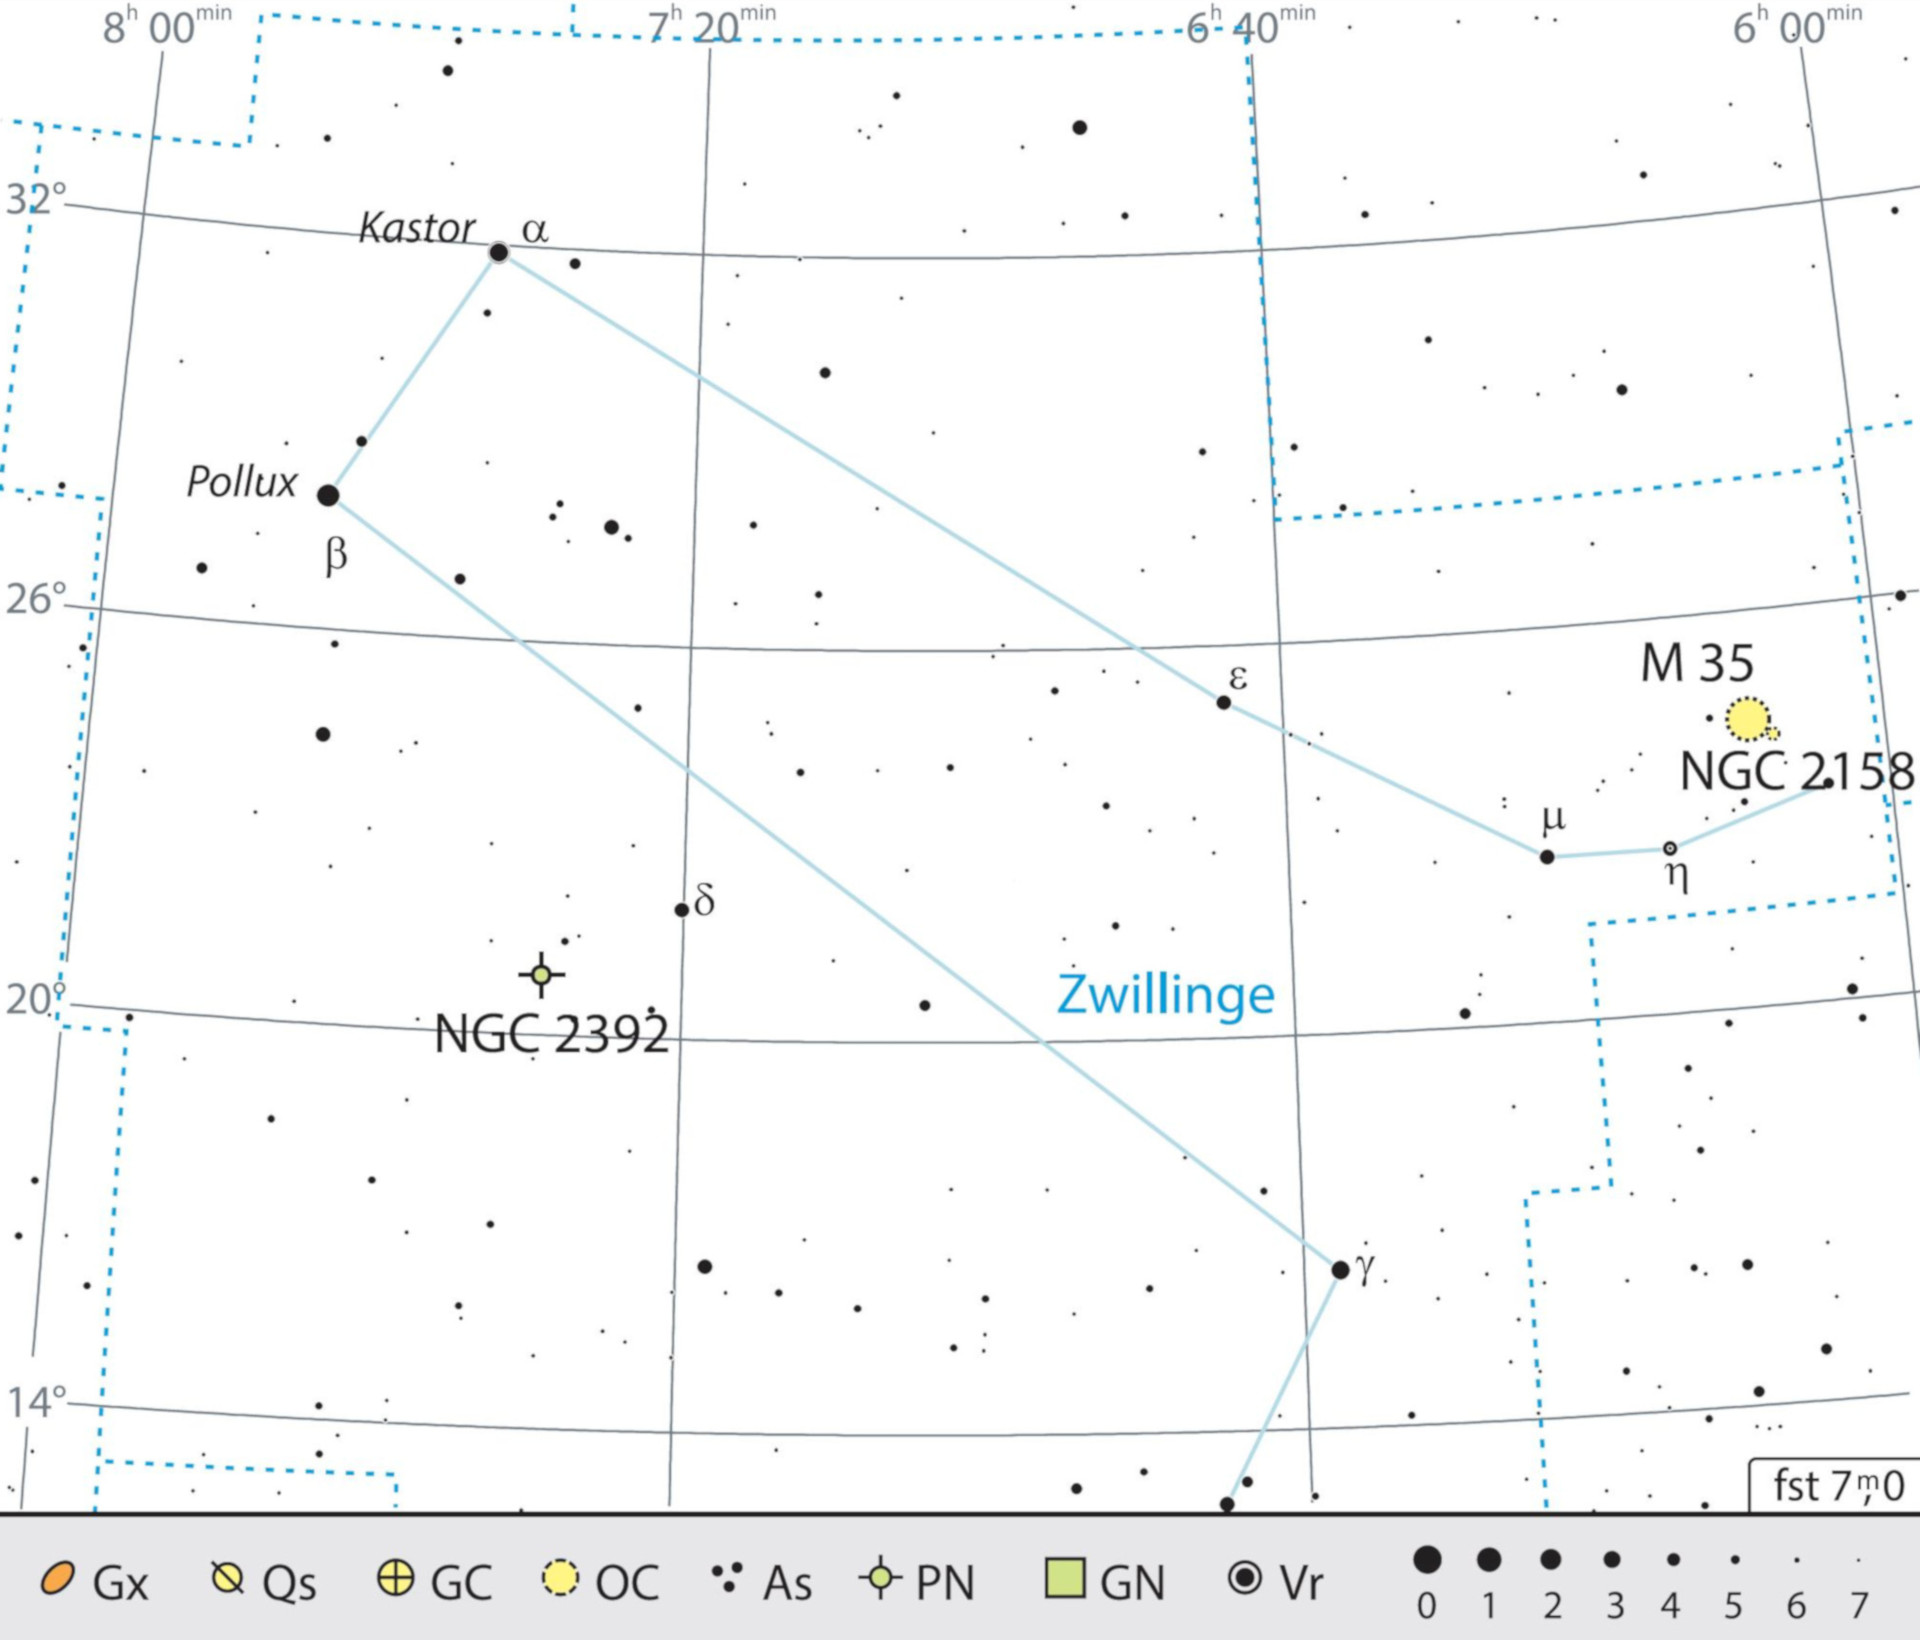 Outline map of the constellation of Gemini with our observing recommendations. J. Scholten